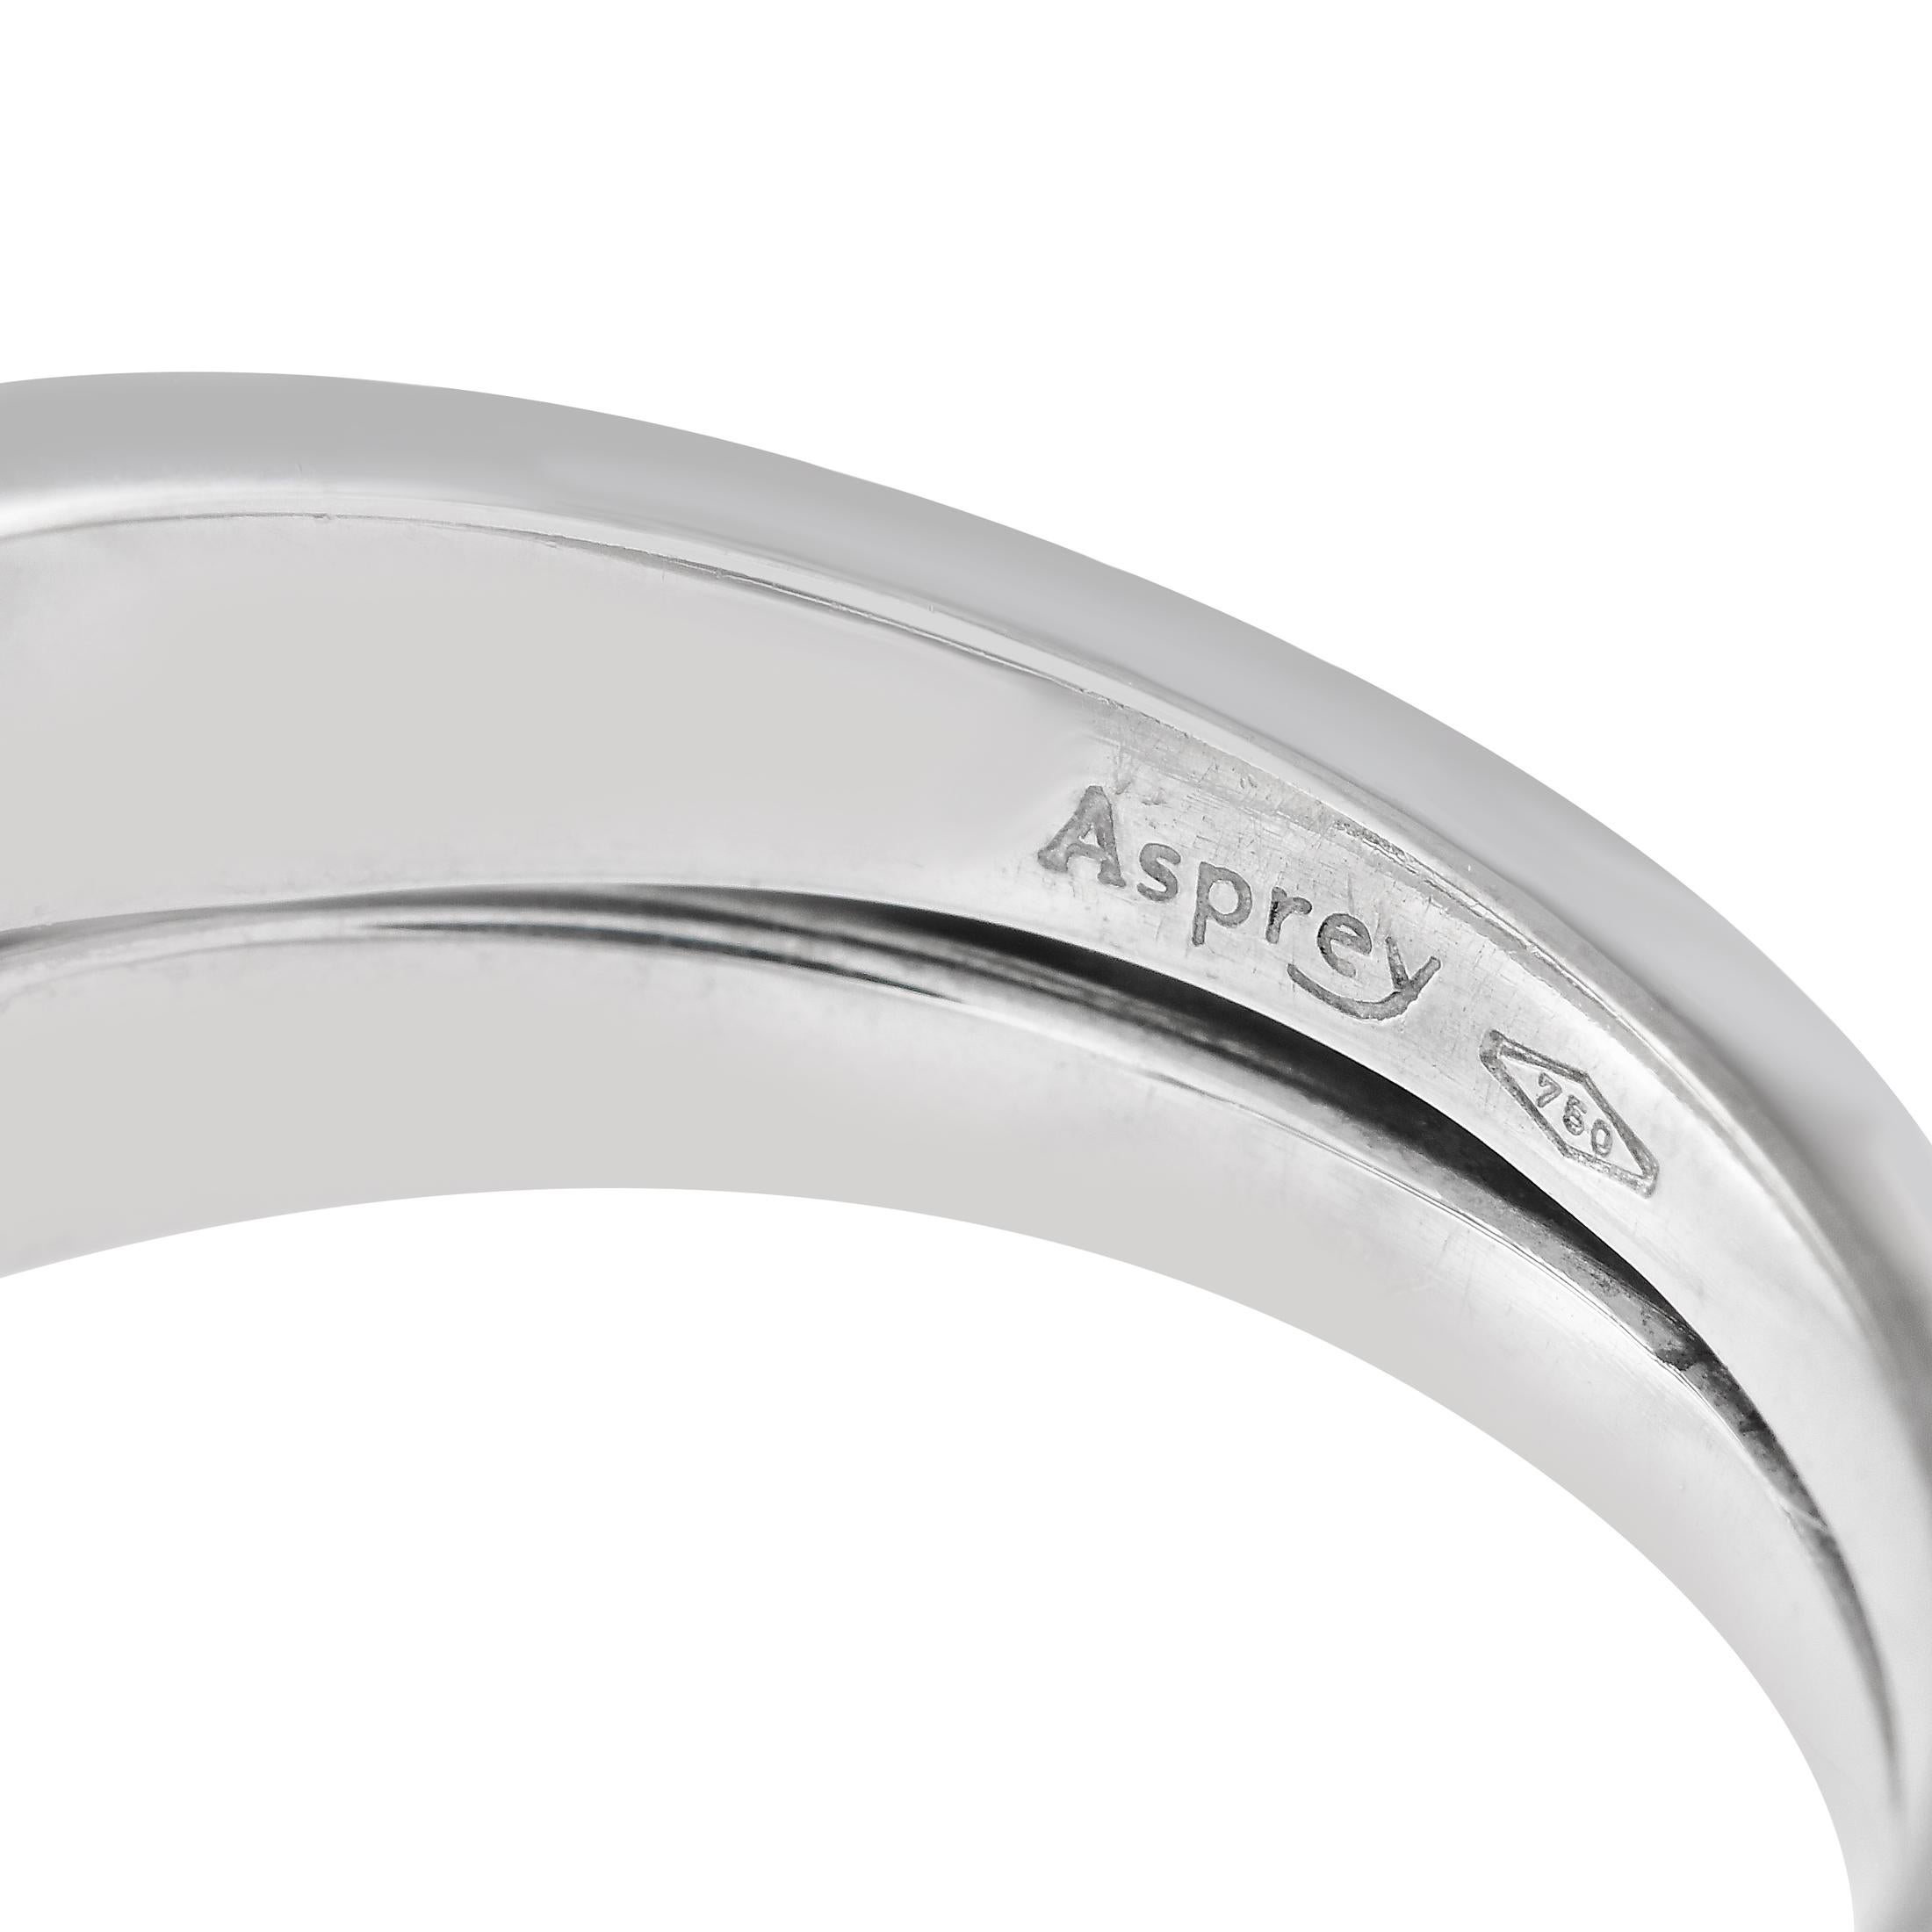 Asprey 18K White Gold 0.65ct Diamond Ring In Excellent Condition For Sale In Southampton, PA